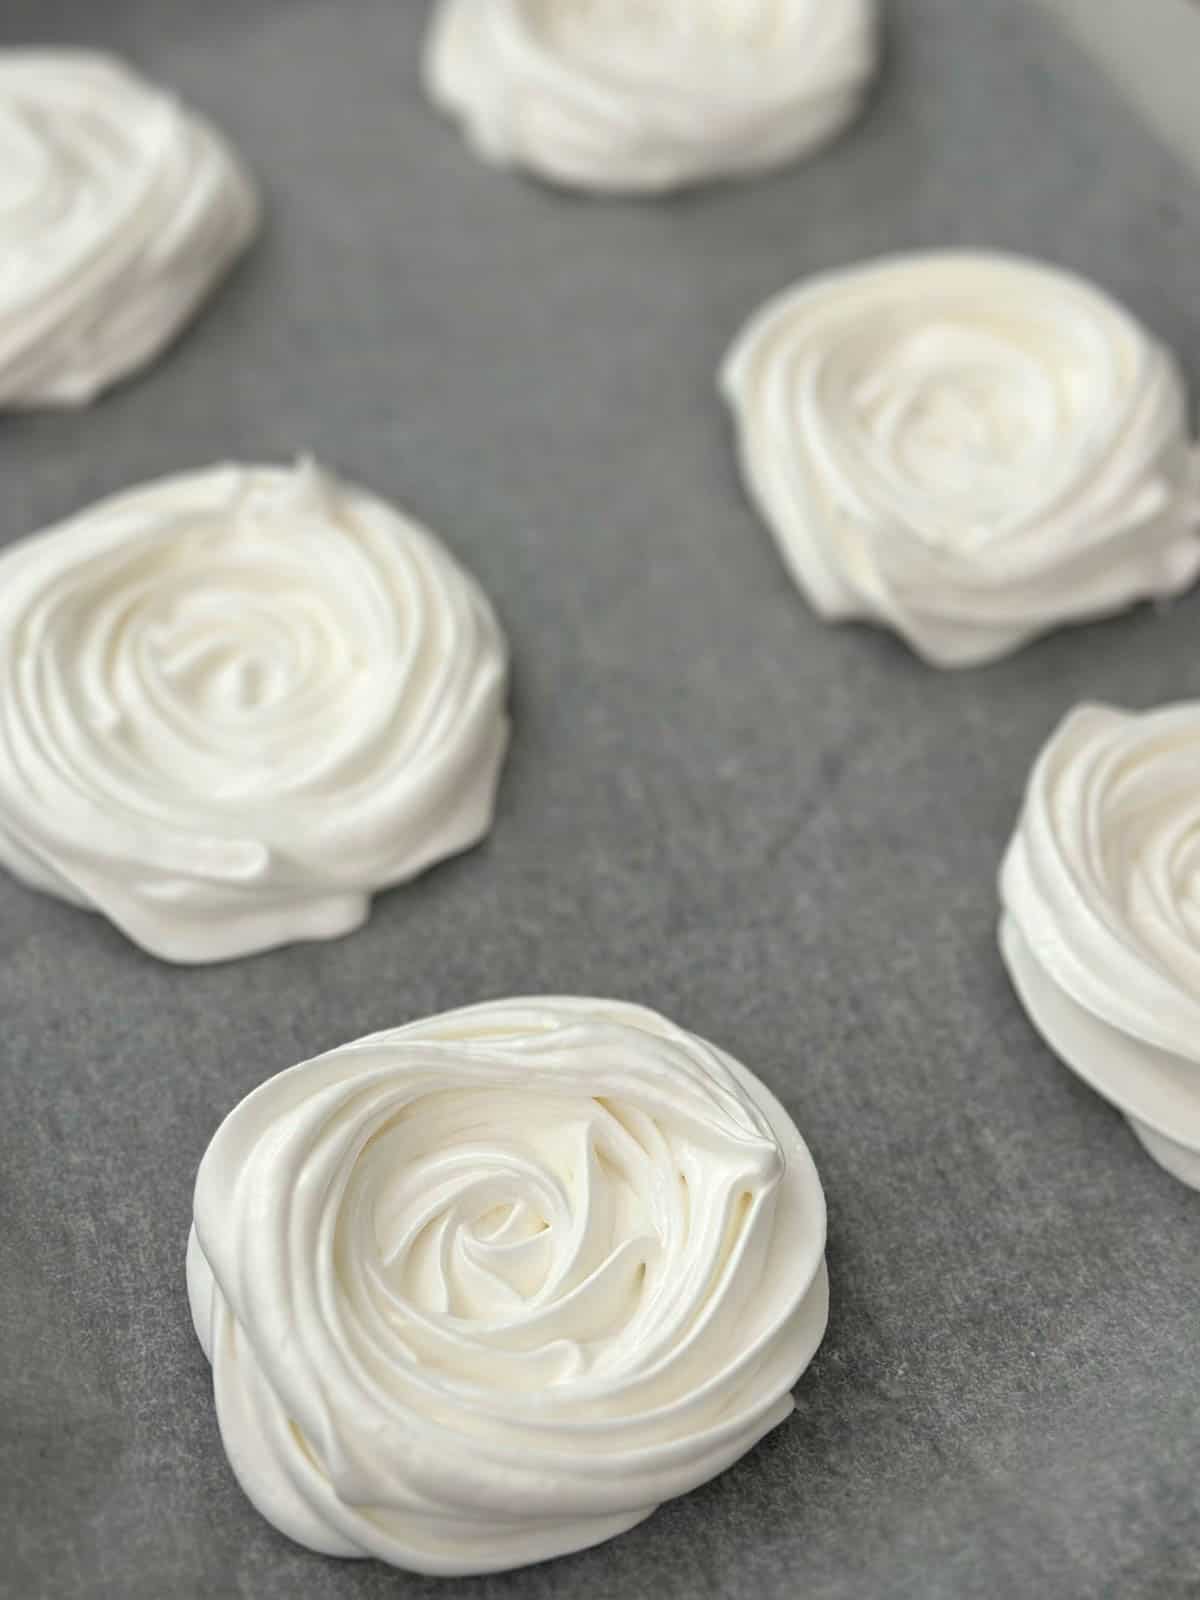 Piped meringues on a baking tray. 